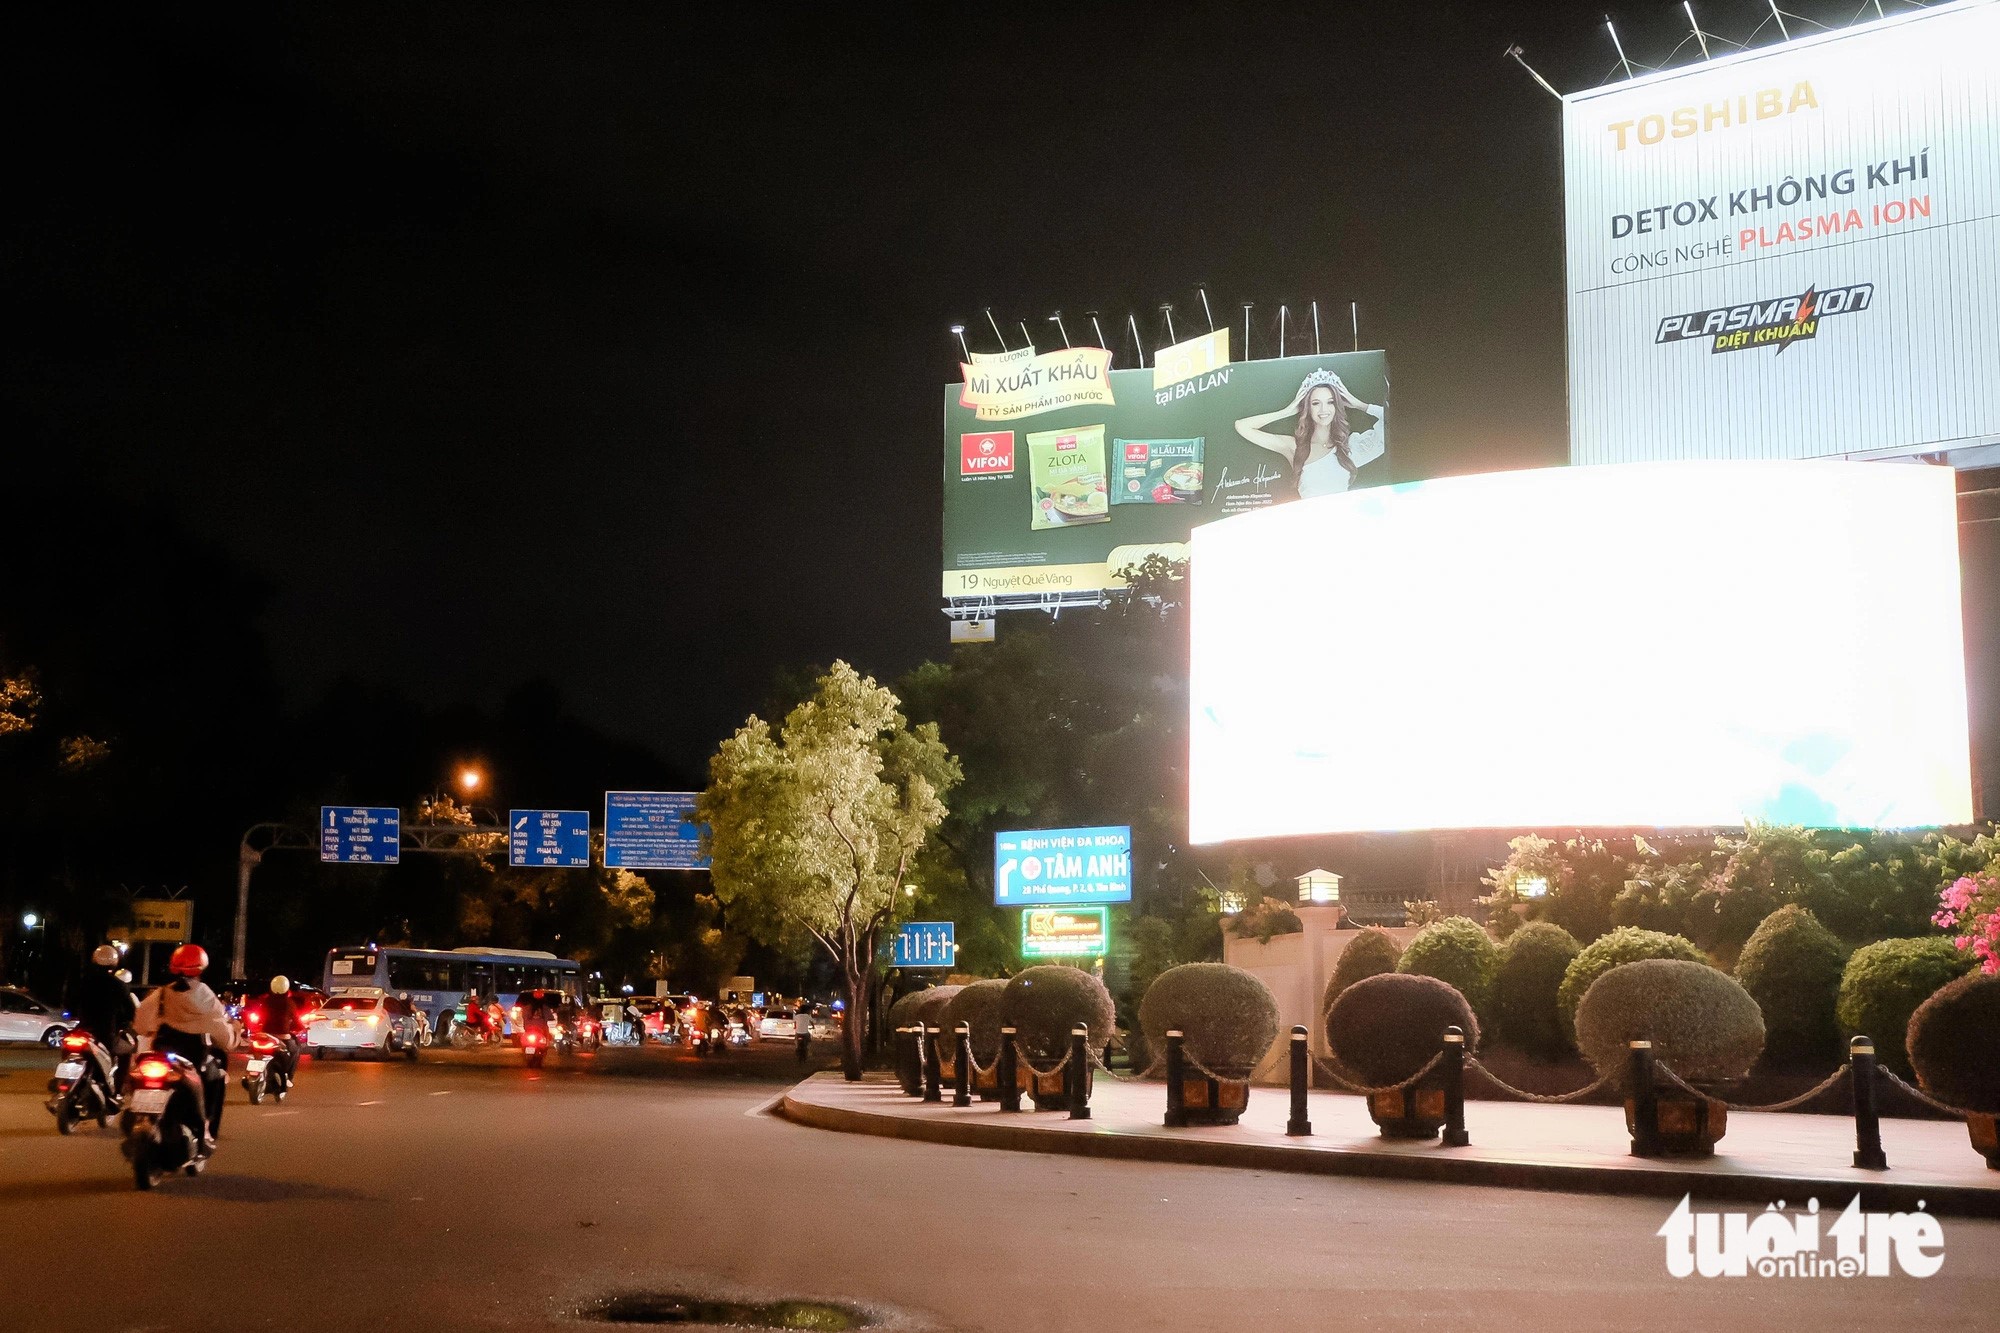 LED screens at the intersection of Hoang Van Thu and Nguyen Van Troi Streets in Phu Nhuan District, Ho Chi Minh City.